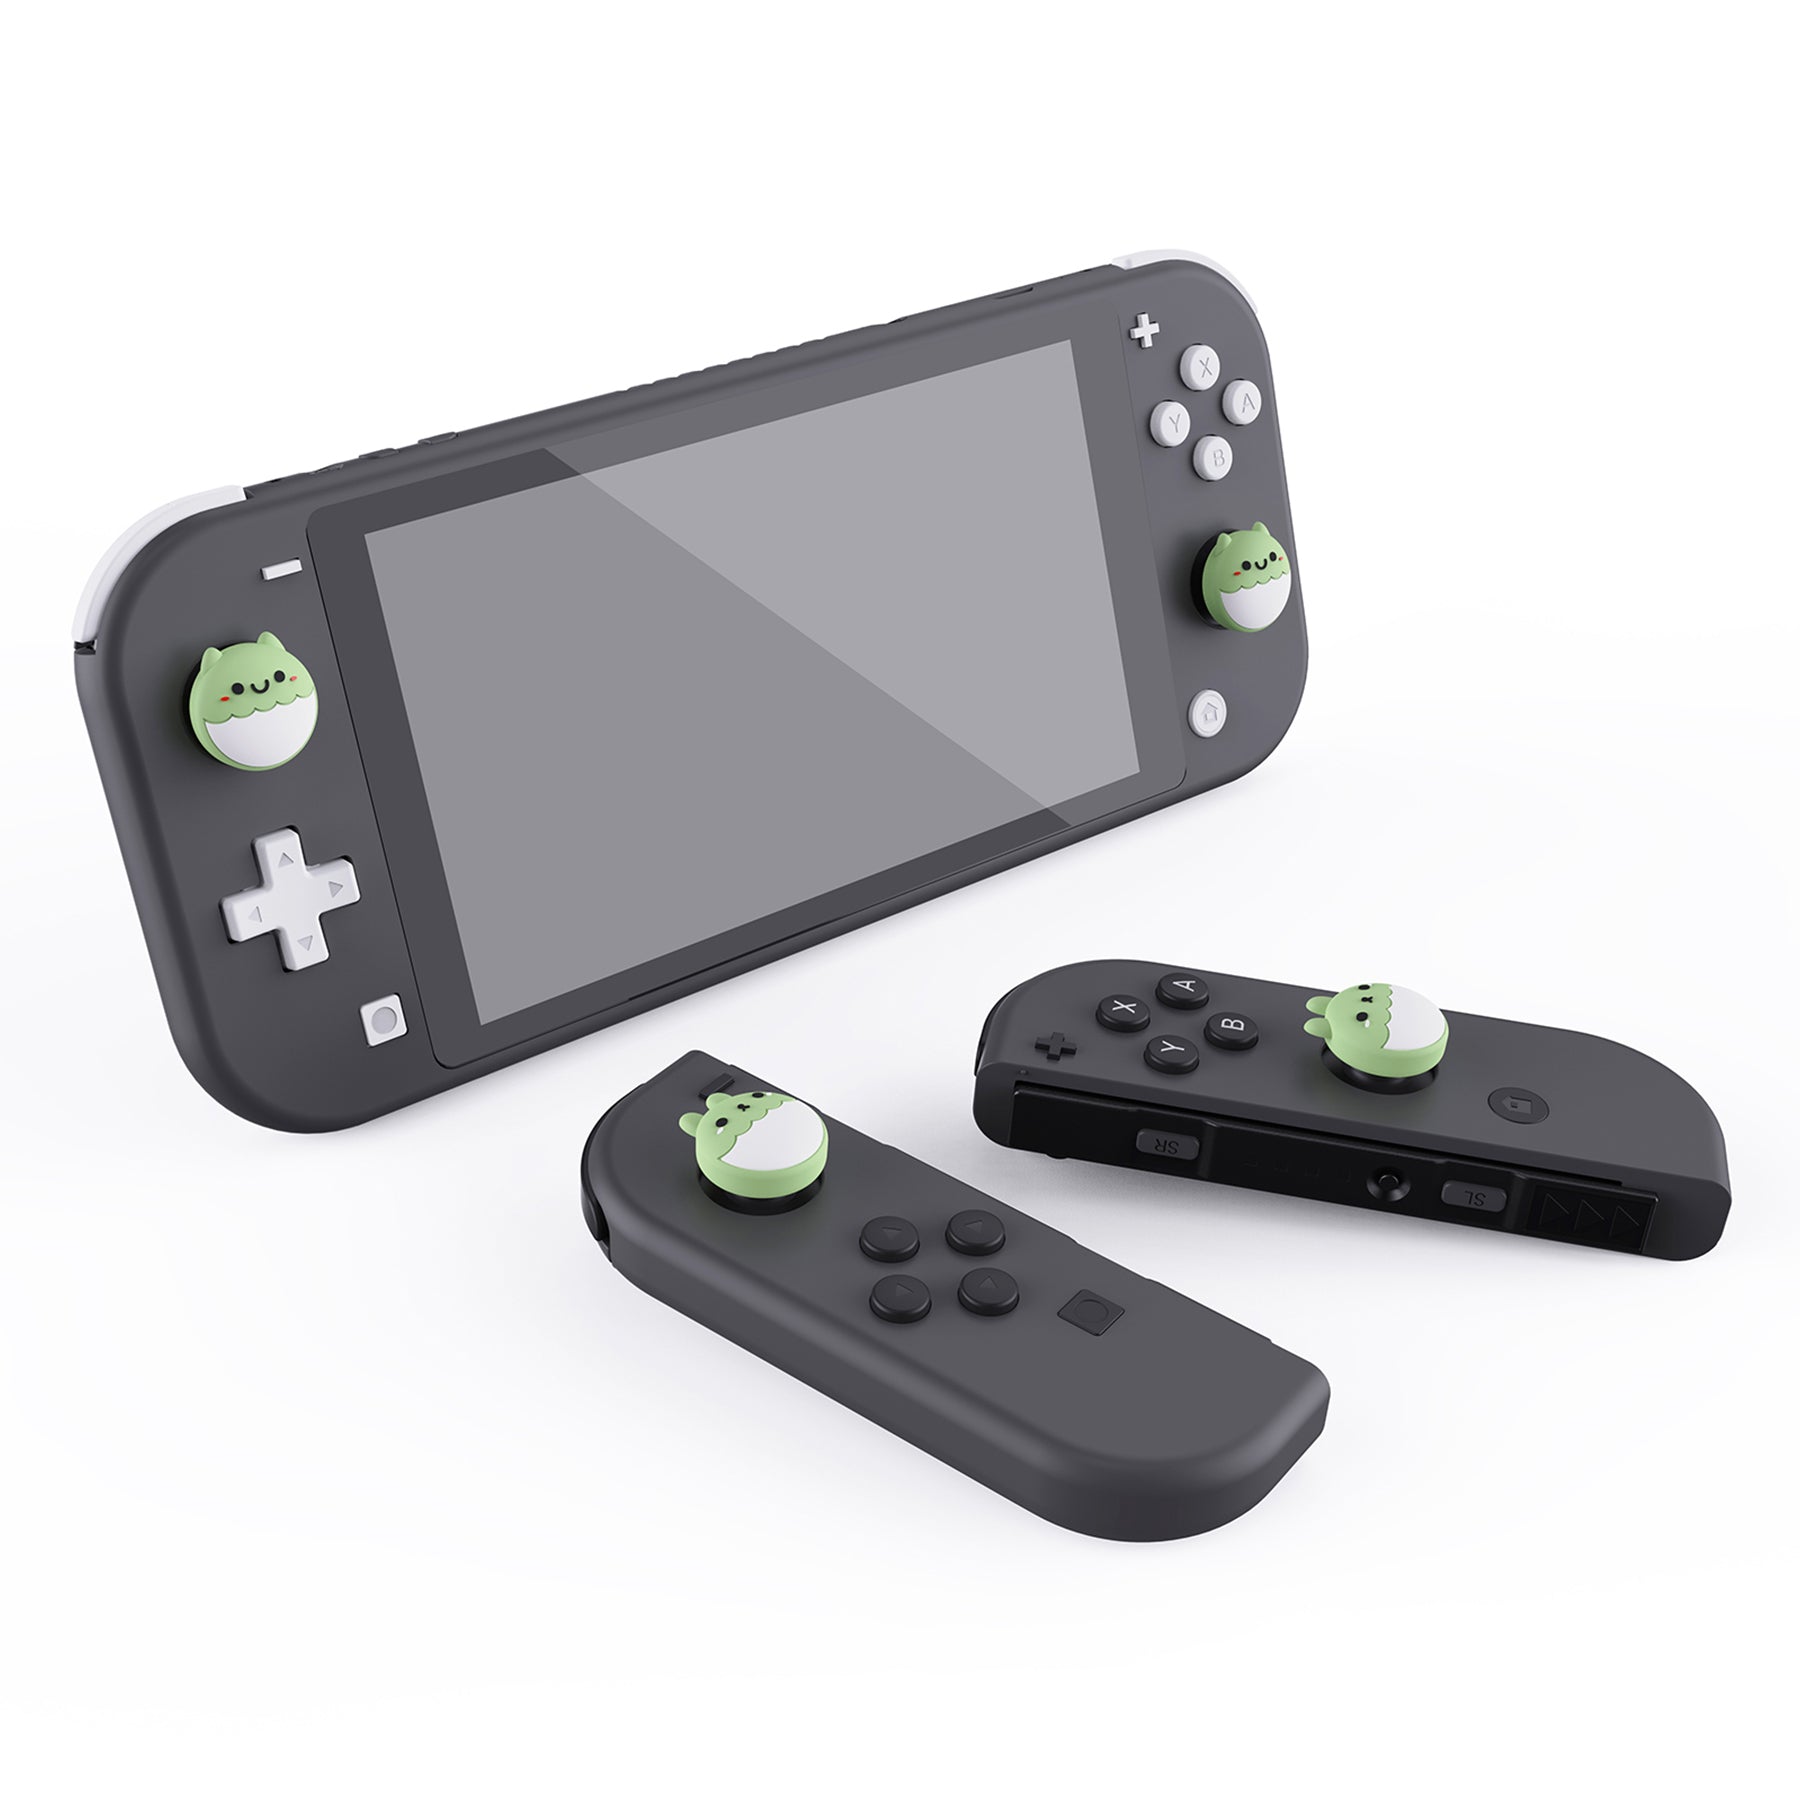 PlayVital Rabbit & Squirrel Cute Thumb Grip Caps for Nintendo Switch, Joystick Caps for Nintendo Switch Lite, Analog Cover Thumbstick Grips for OLED Joycon - Matcha Green - NJM1123 playvital